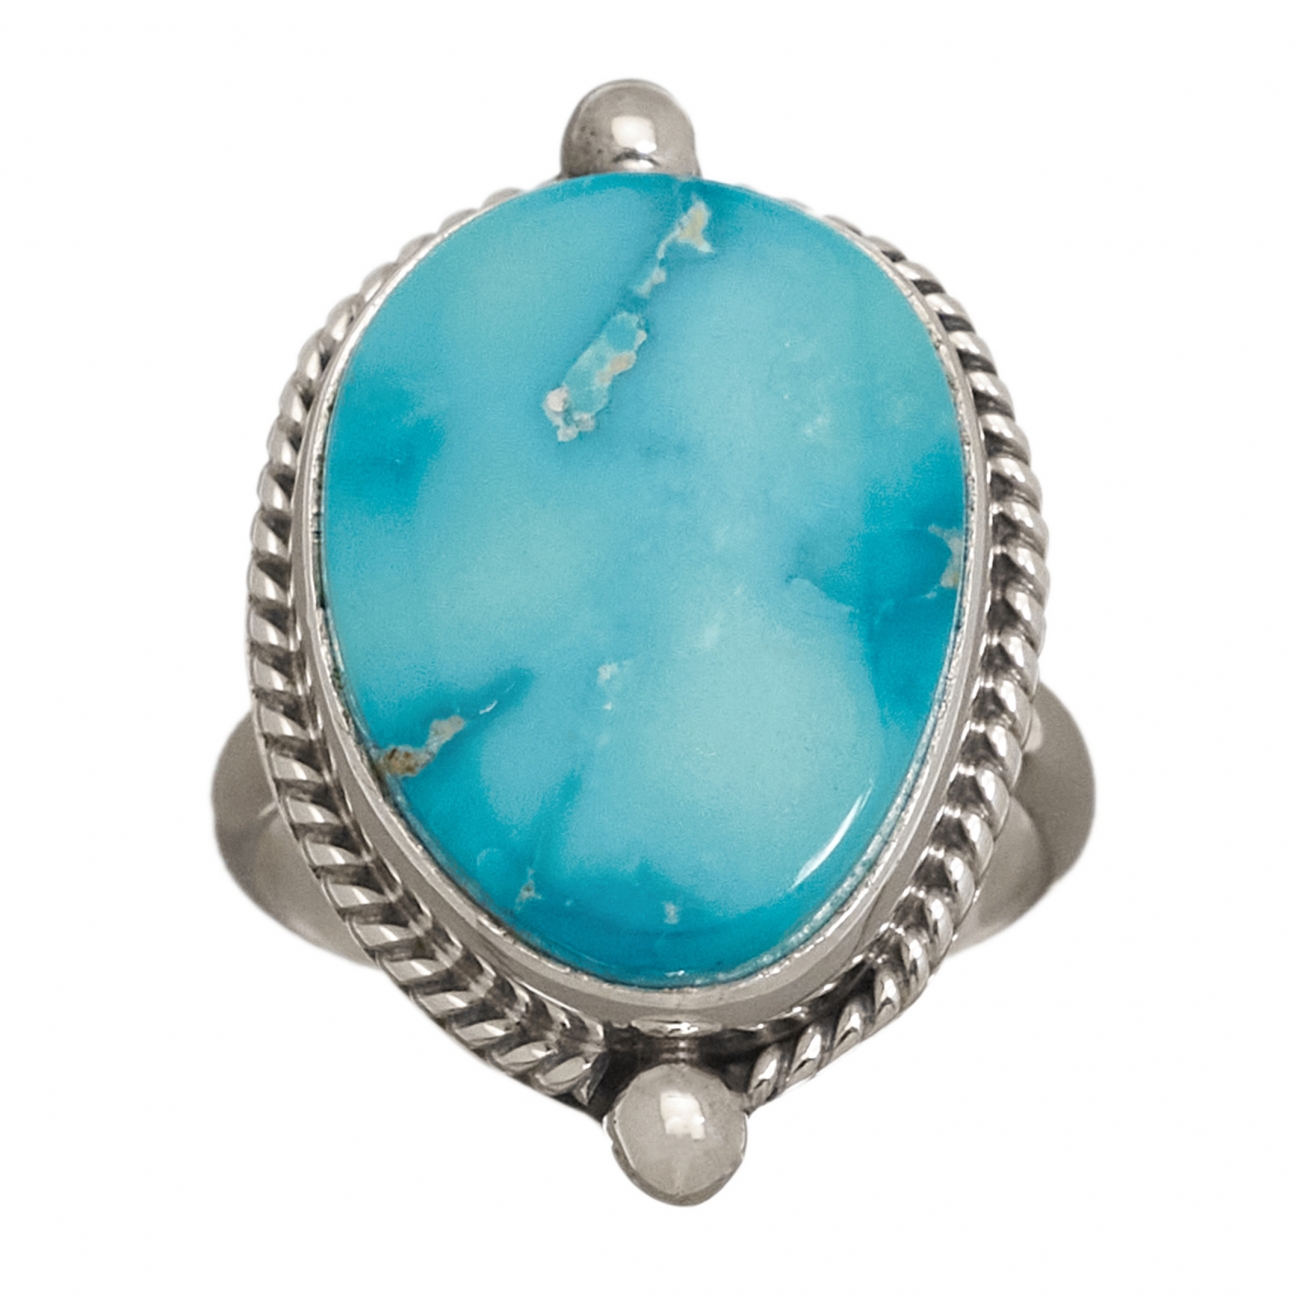 Navajo ring BA1183 for women in turquoise and silver - Harpo Paris